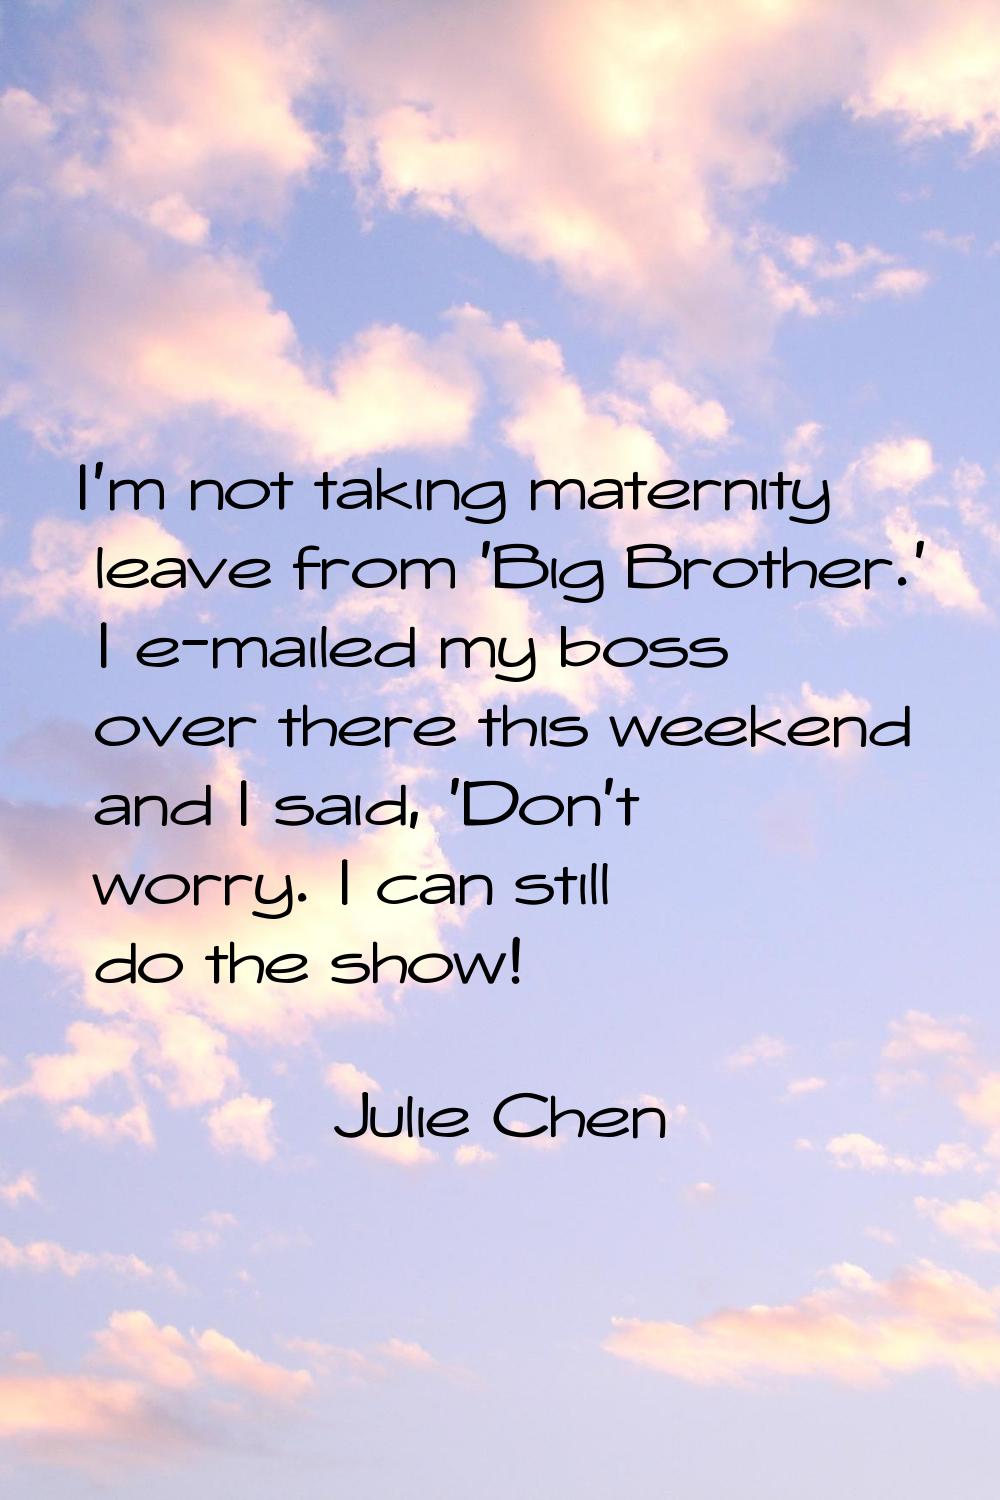 I'm not taking maternity leave from 'Big Brother.' I e-mailed my boss over there this weekend and I